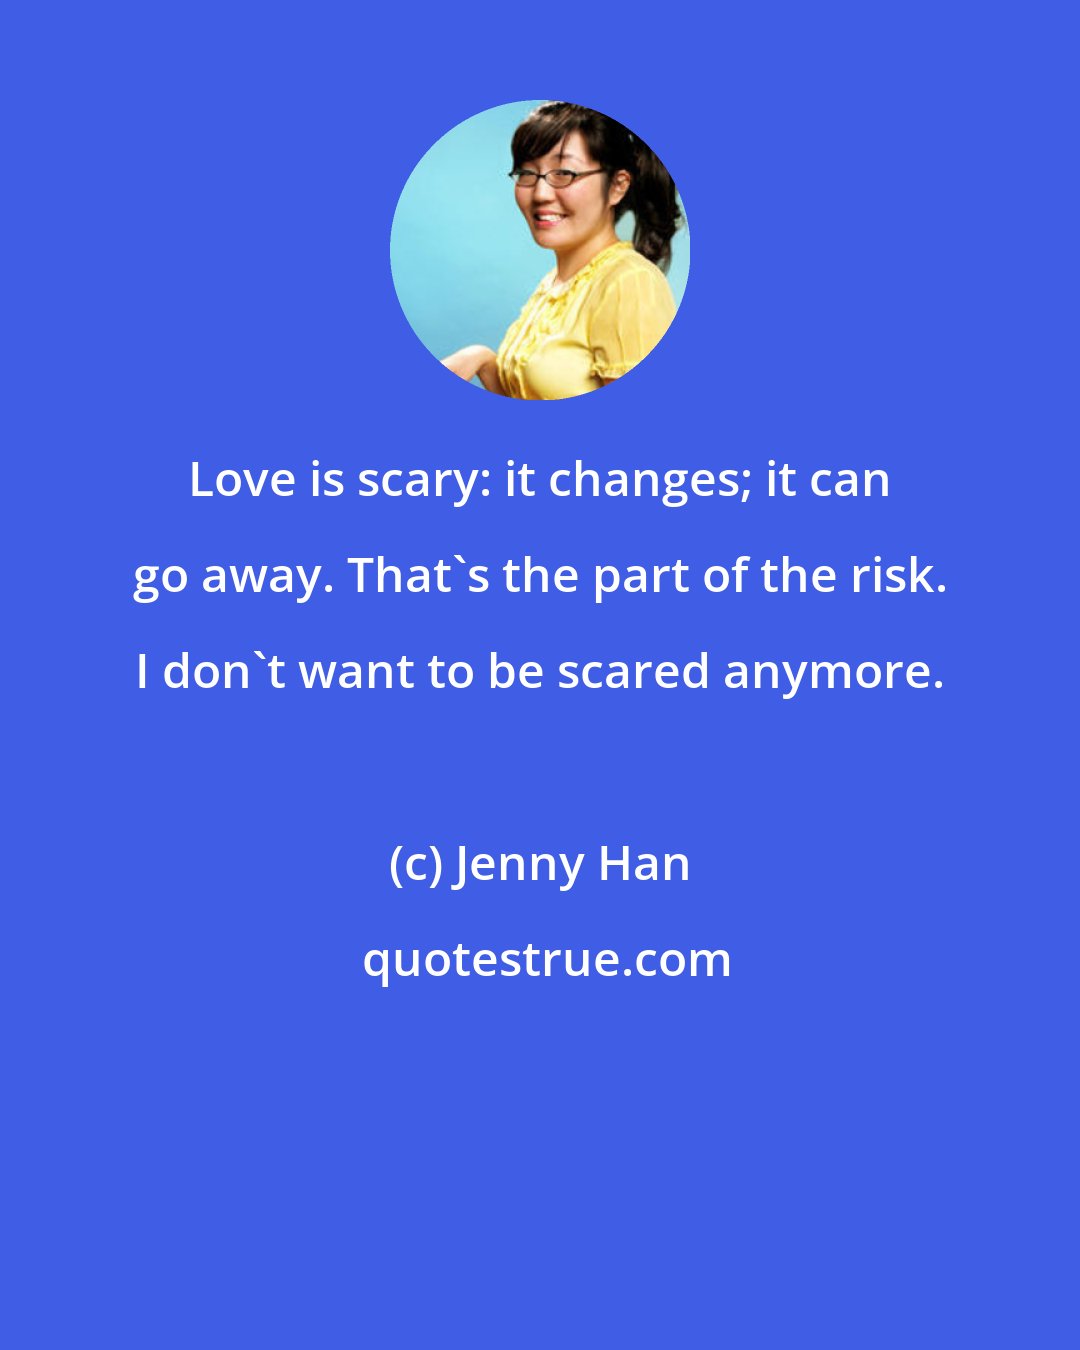 Jenny Han: Love is scary: it changes; it can go away. That's the part of the risk. I don't want to be scared anymore.